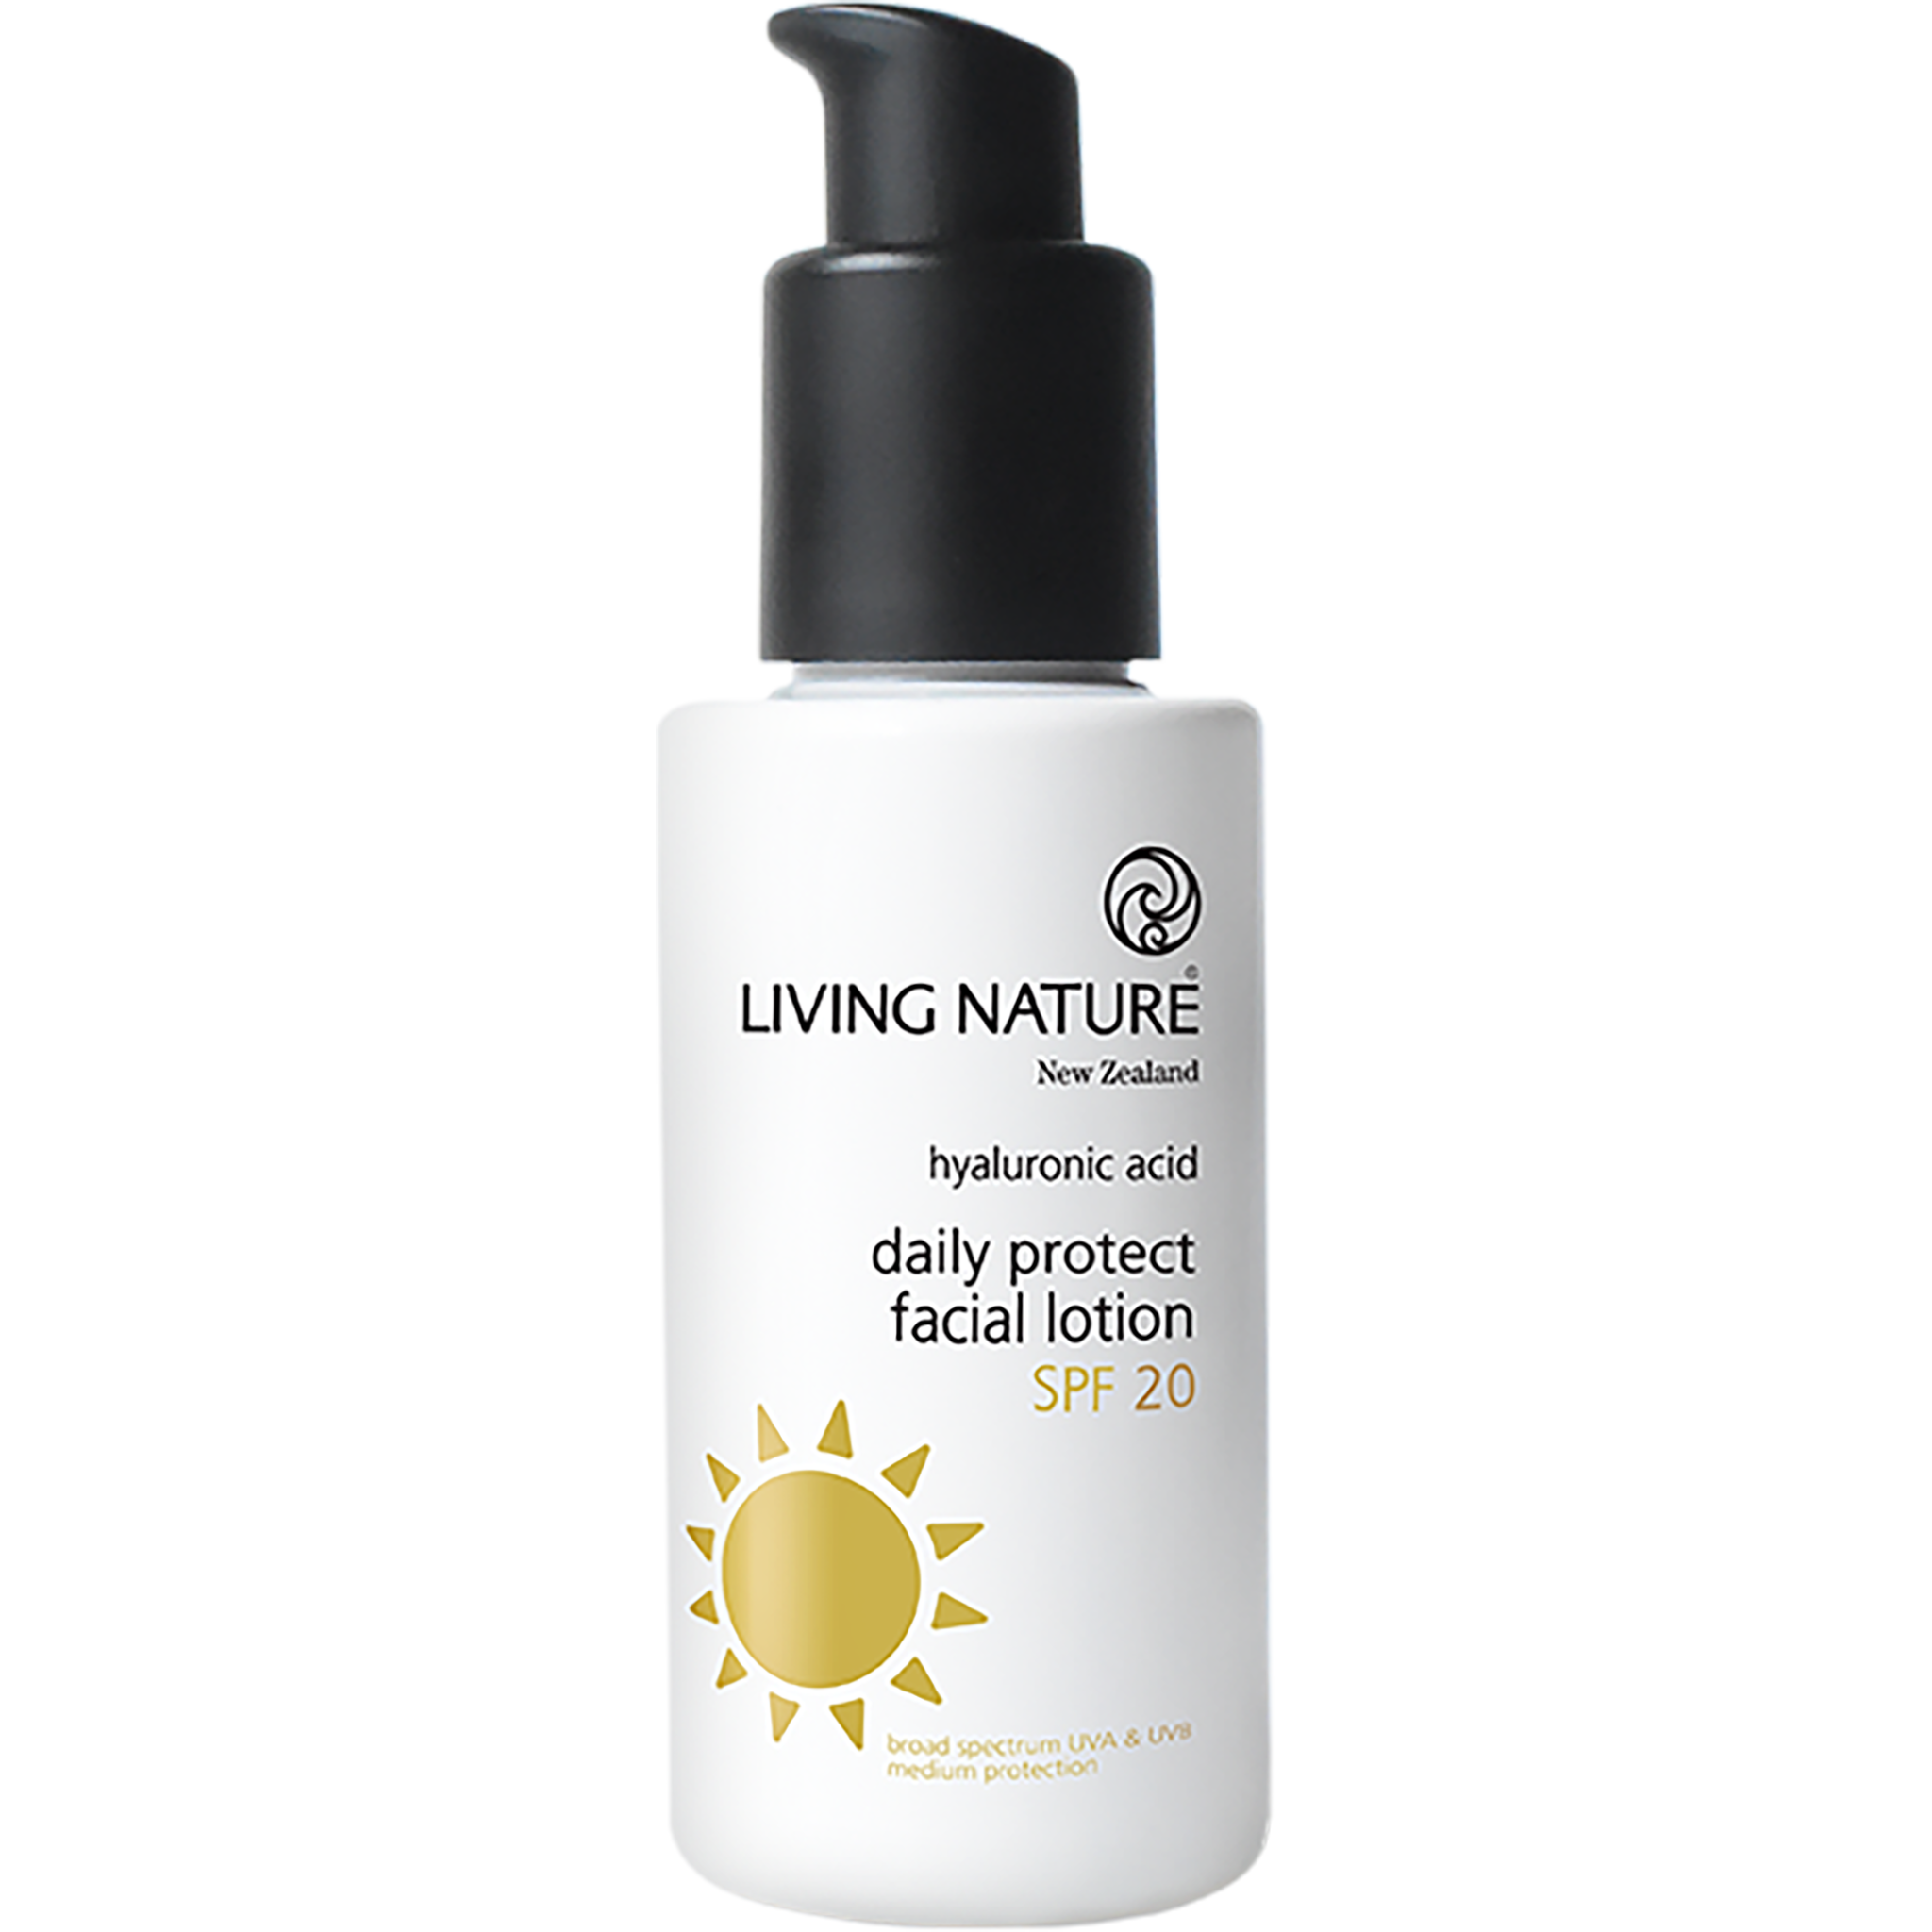 NEW Daily Protect Facial Lotion SPF 20